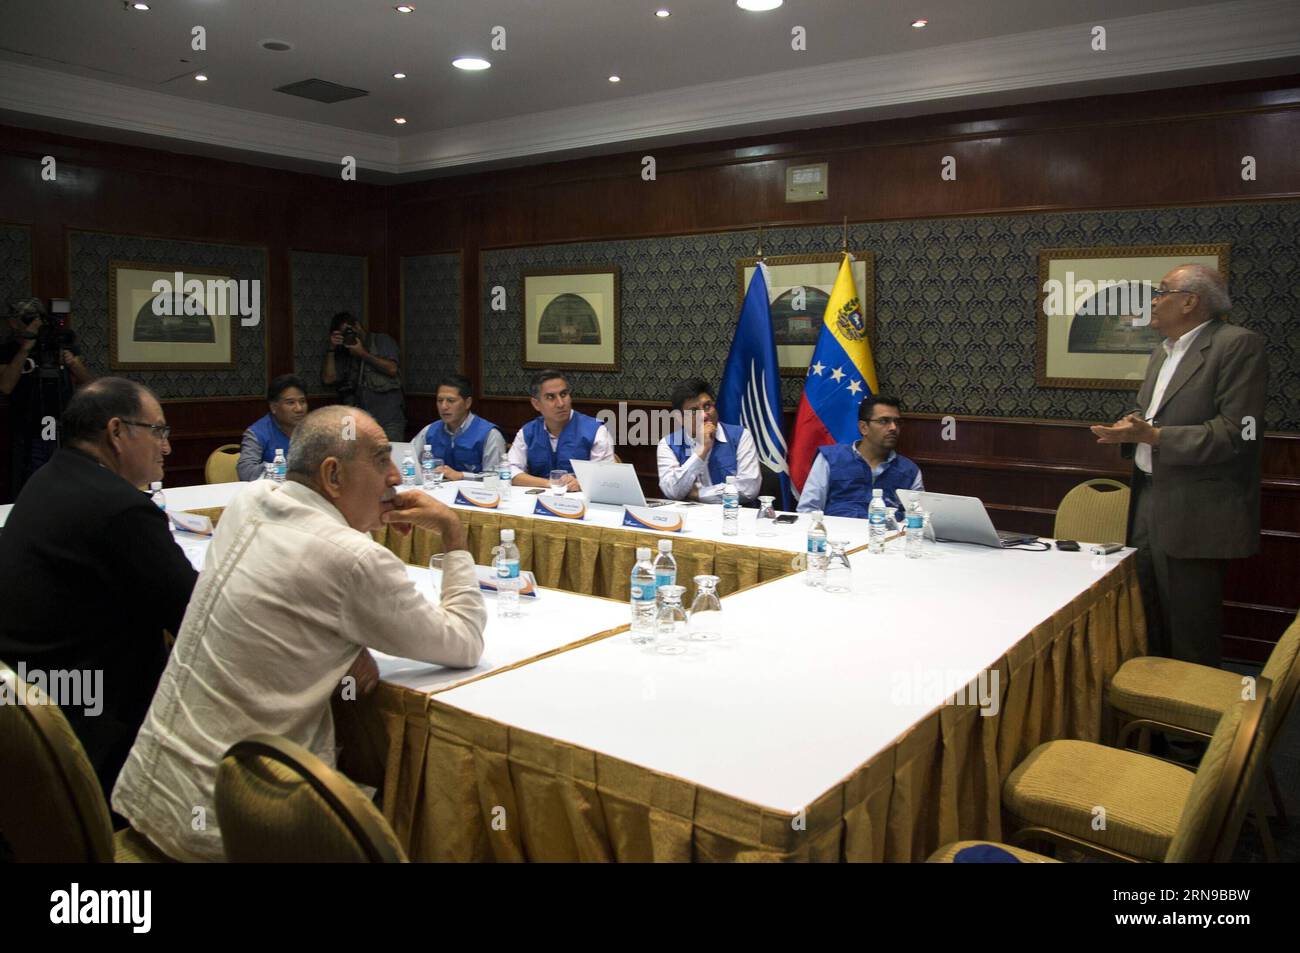 (151127) -- CARACAS, Nov. 27, 2015 -- Members of the opposition Unity Board meet with members of the Observation Commission of the Union of South American Nations (USAN) in Caracas, Venezuela, on Nov. 26, 2015. The Public Ministry of Venezuela opened on Thursday an investigation to clarify the death of a regional opposition party Democratic Action leader, Luis Manuel Diaz, that happened during an electoral campaign act in the Guarico state. Regional opposition leader Luis Manuel Diaz was attacked with a firearm on Wednesday, during an electoral campaign act facing the Parlamentary elections of Stock Photo